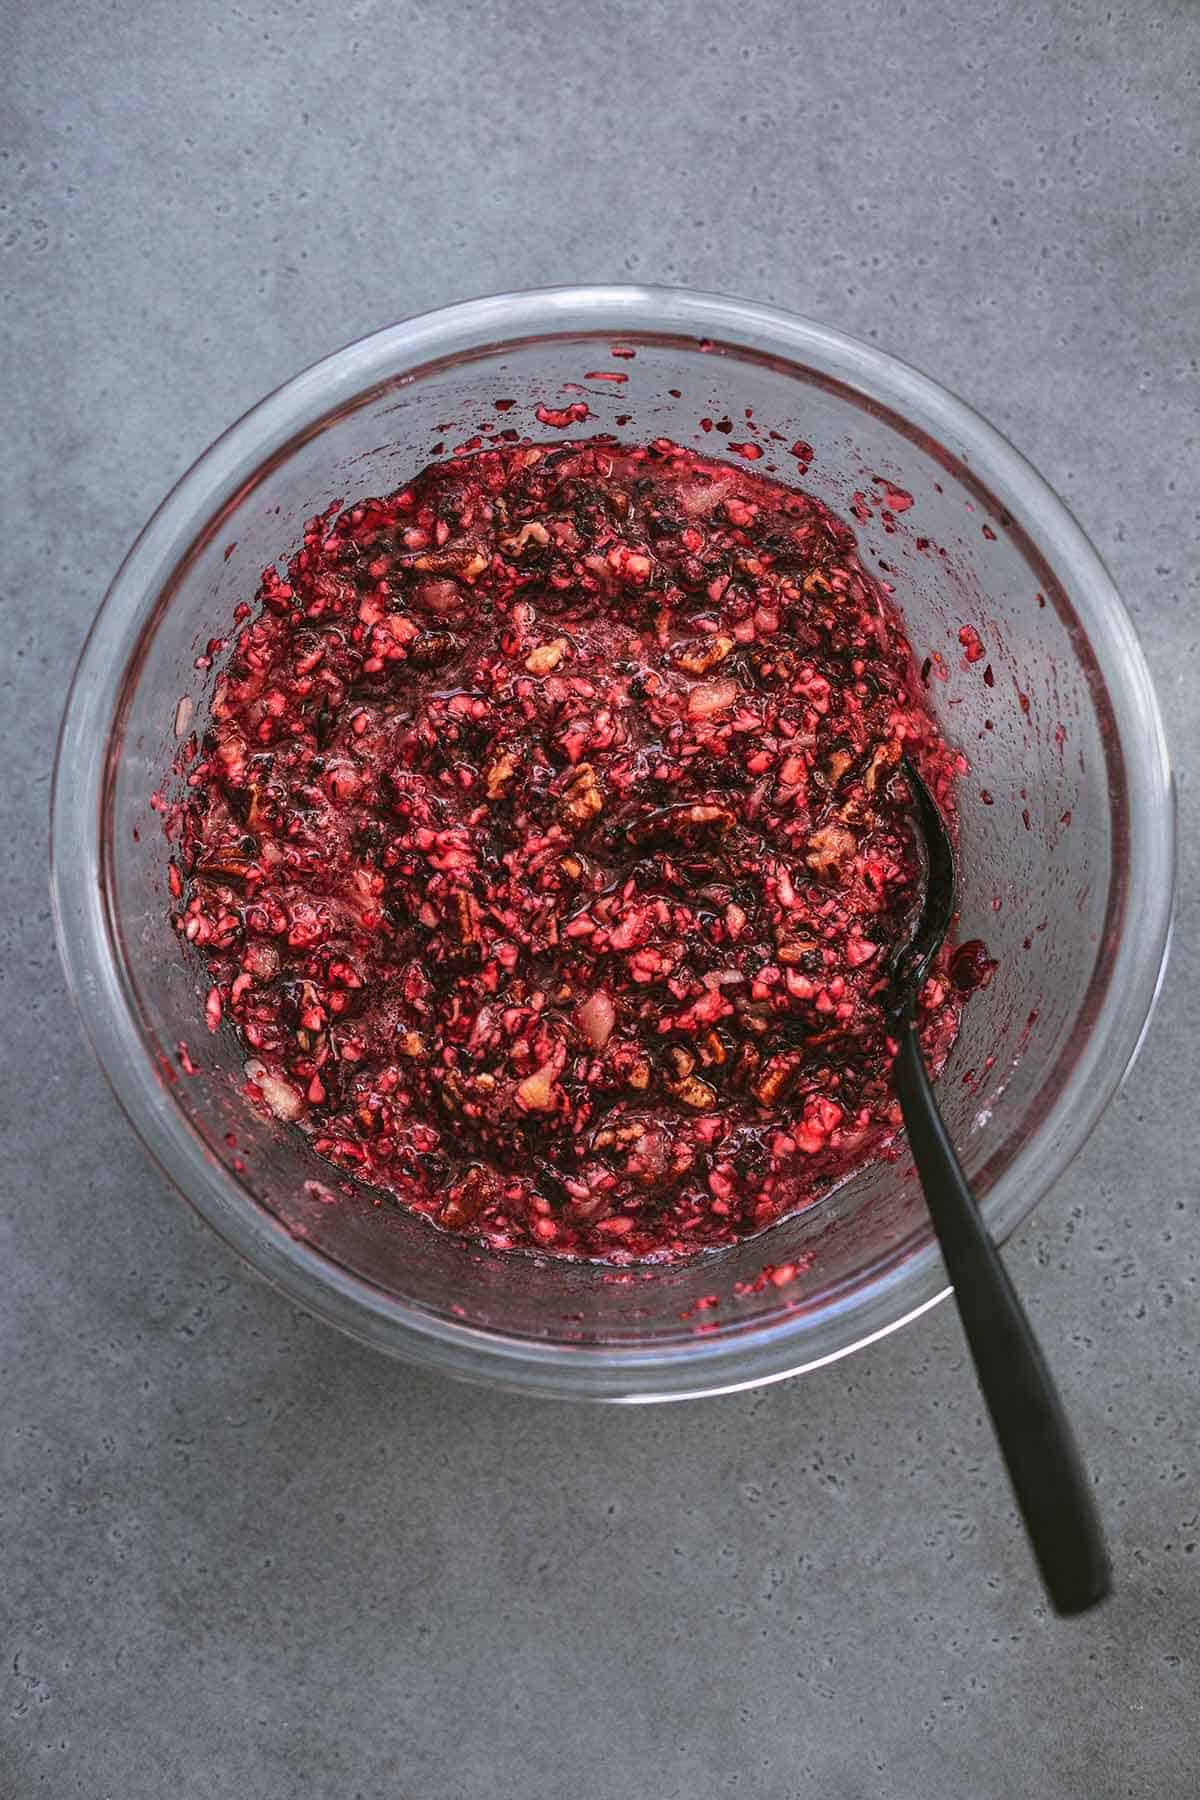 finely chopped red berries and nuts in a glass bowl with a black spoon